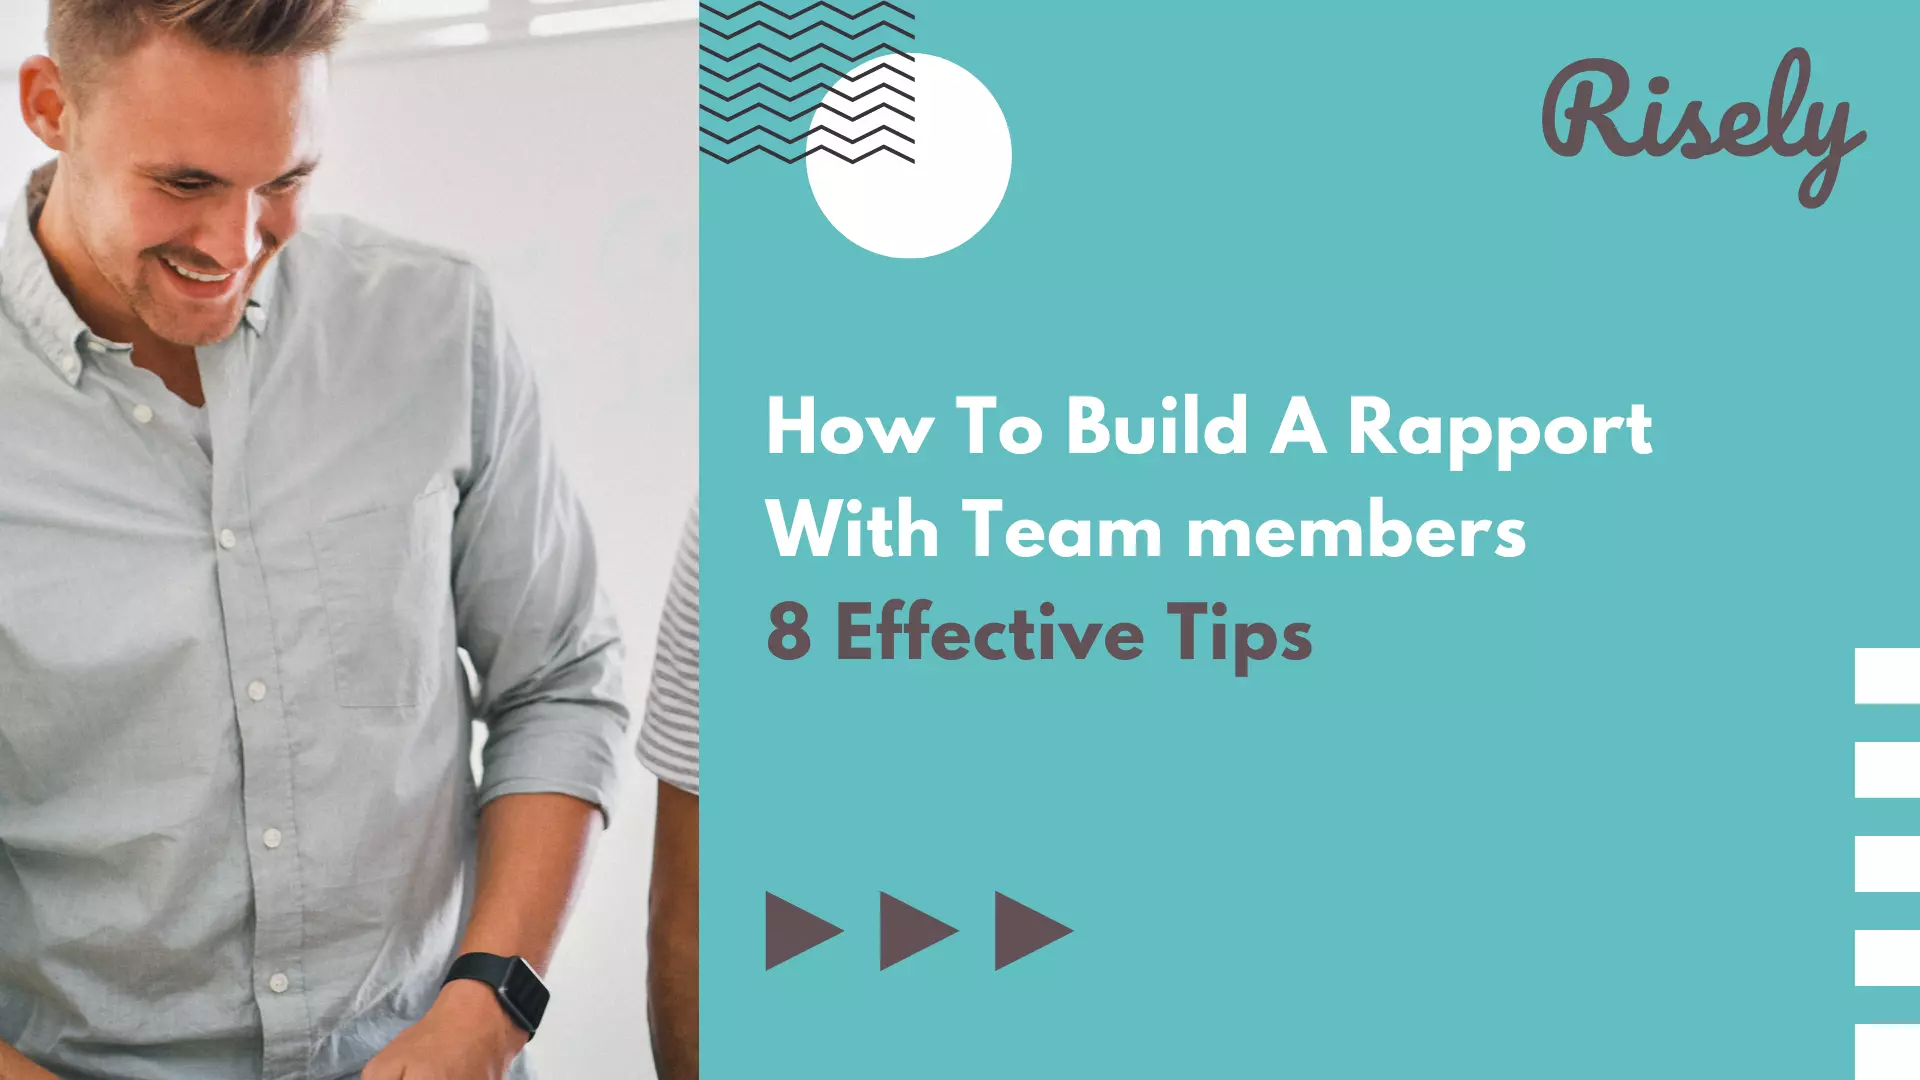 How To Build A Rapport With Team members: 8 Effective Tips